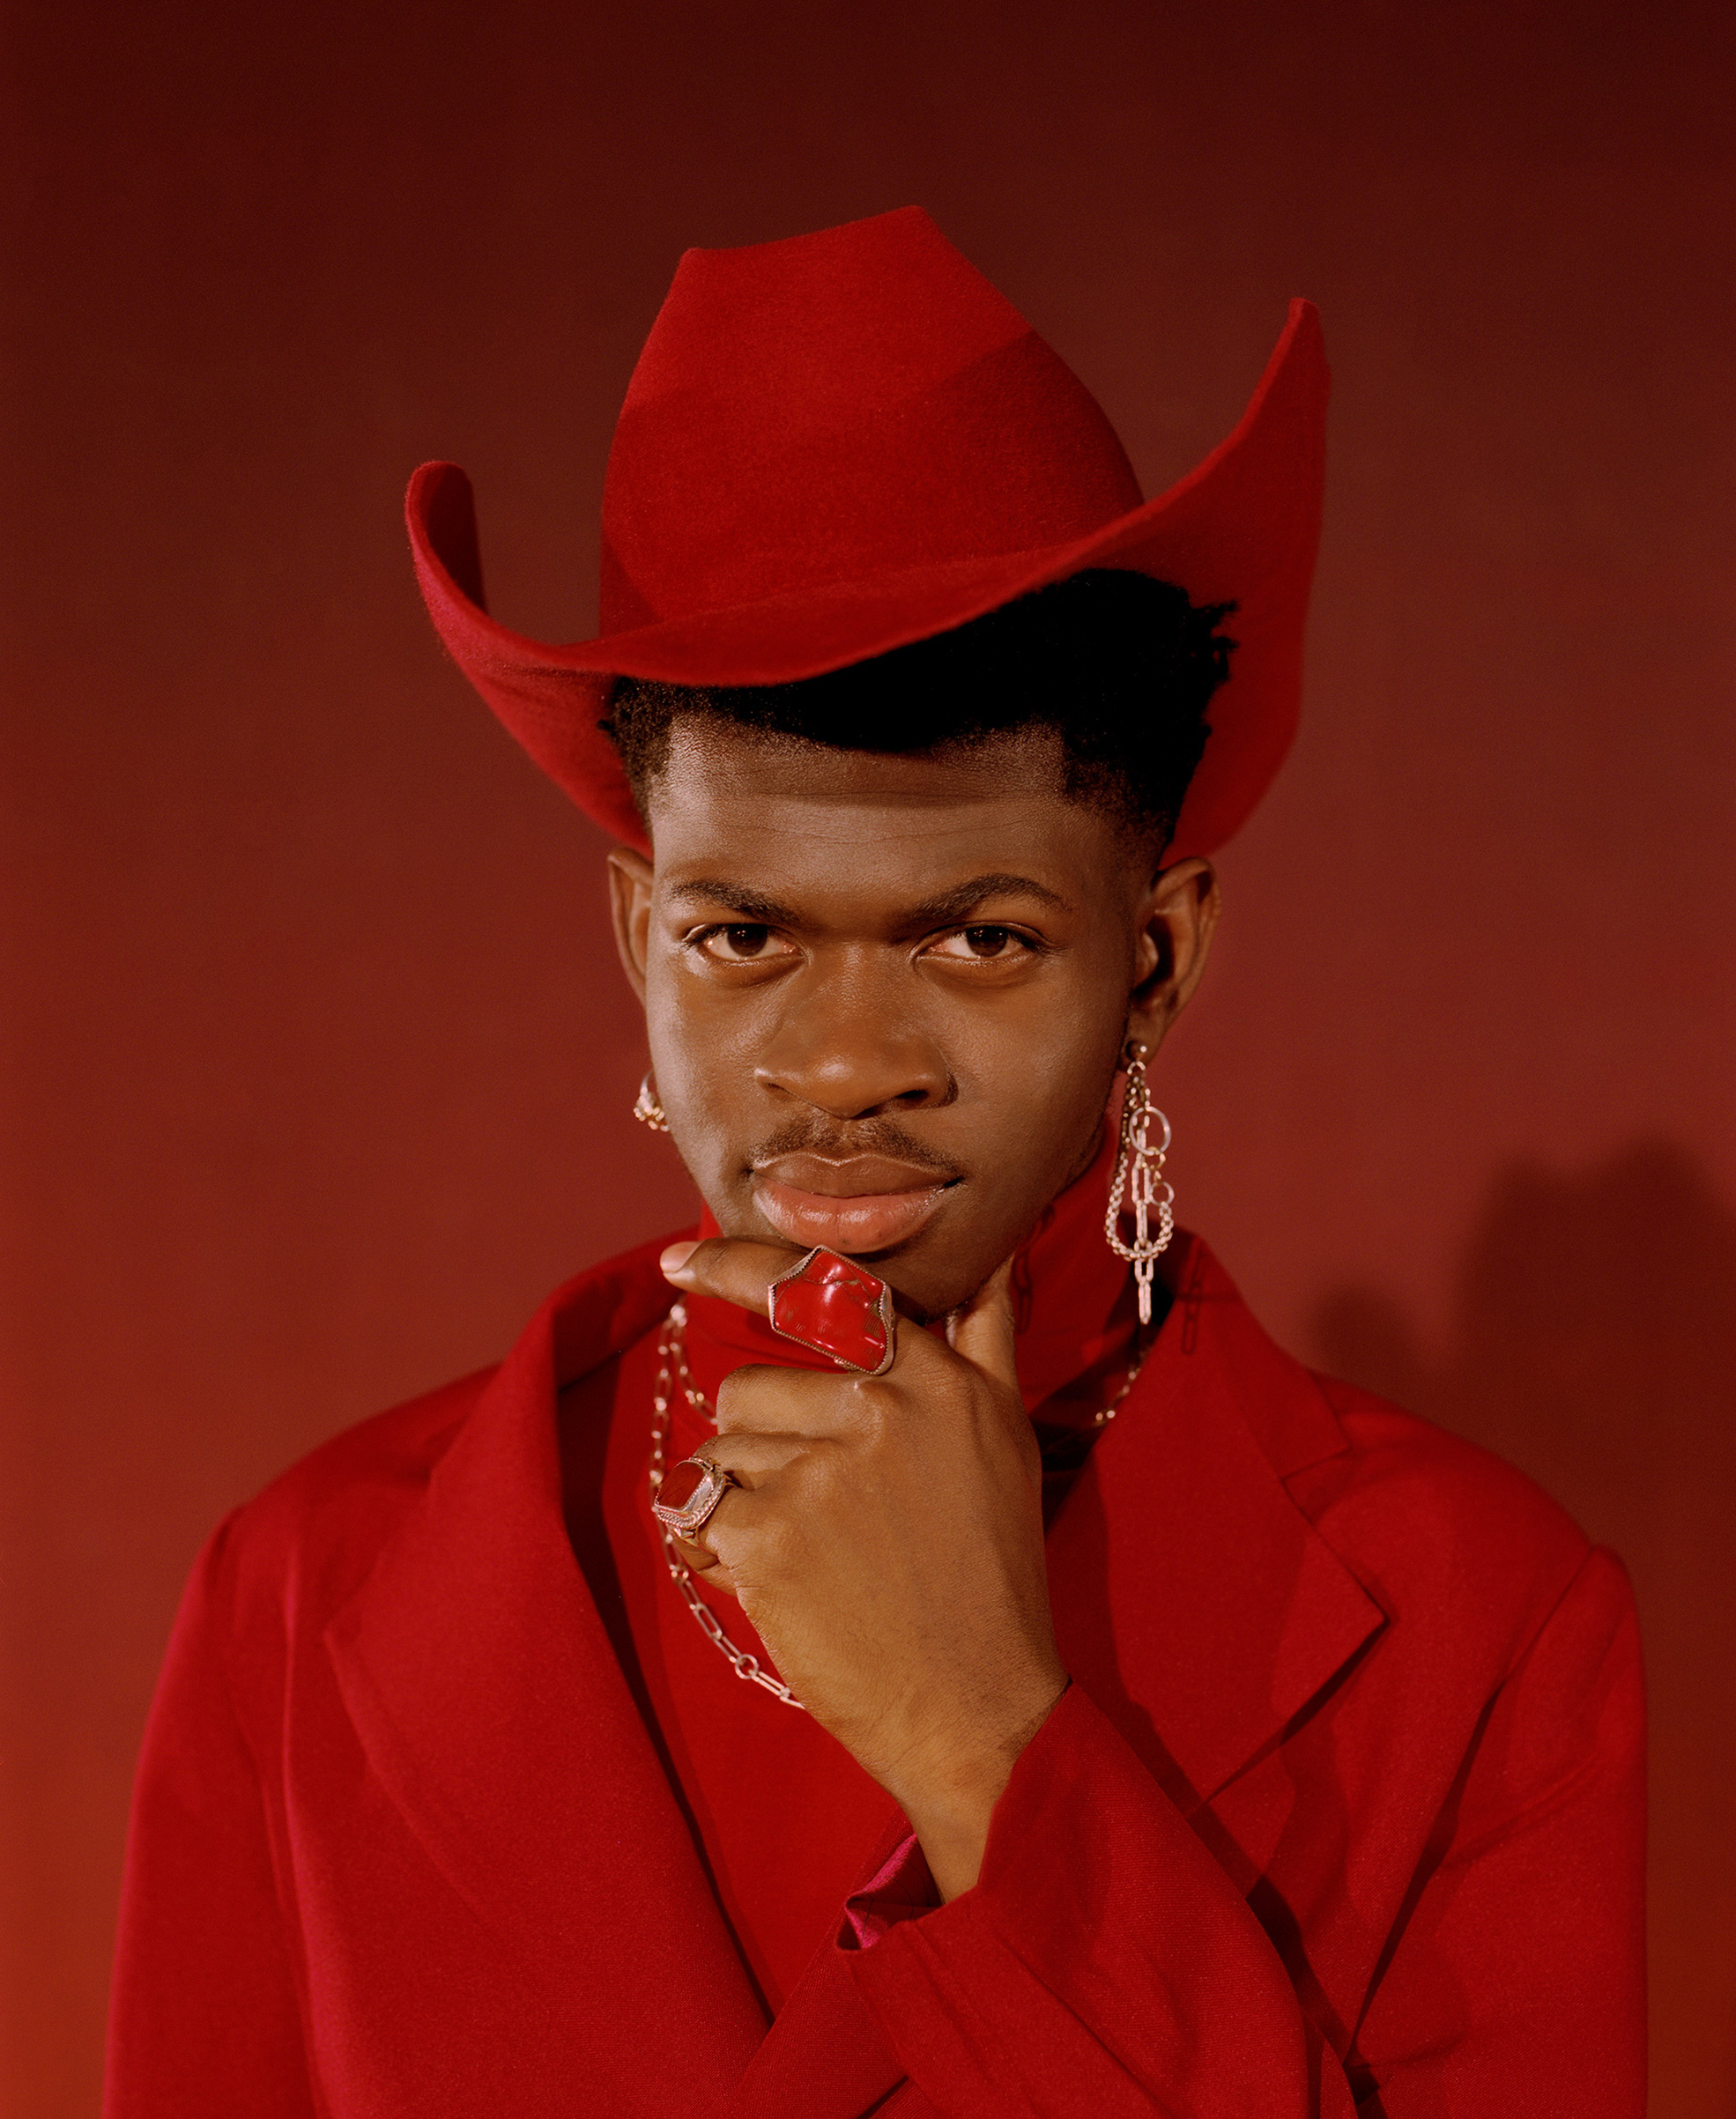 Lil Nas X. "It's His Country," Aug. 26 issue. (Kelia Anne for TIME)